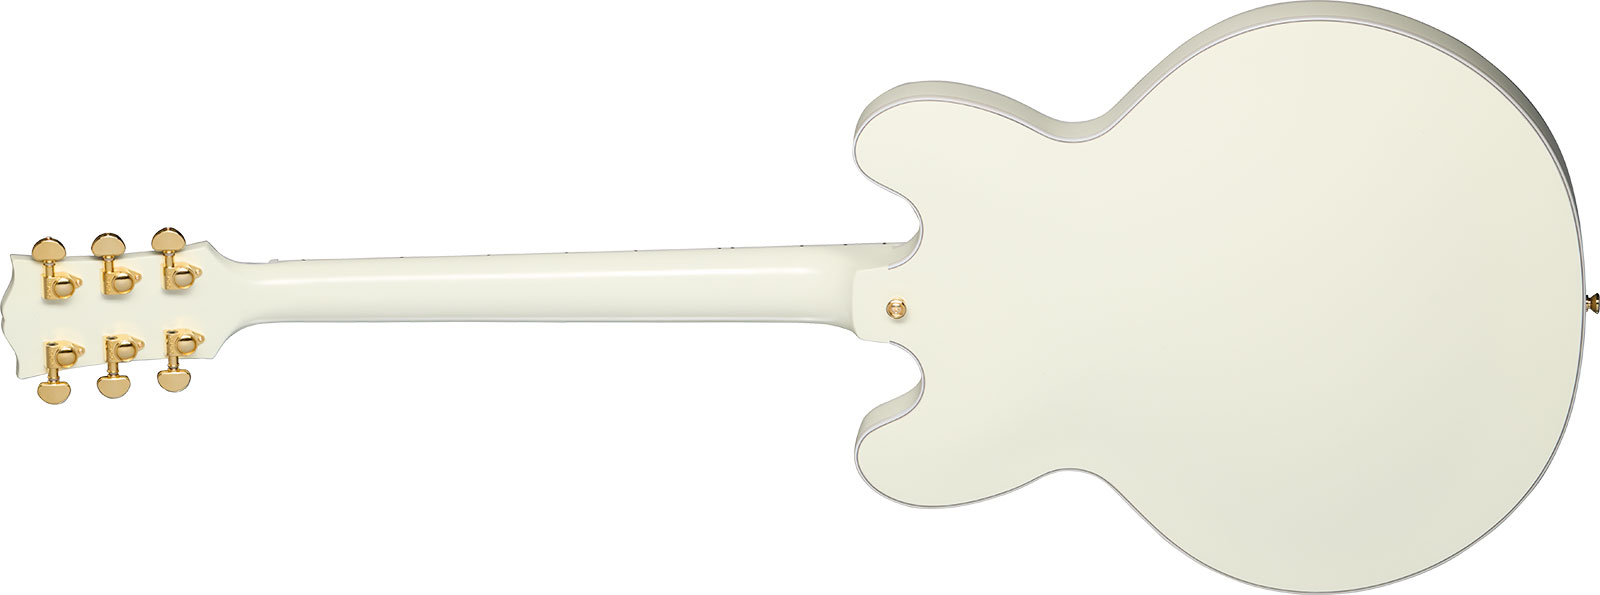 Epiphone Es355 1959 Inspired By 2h Gibson Ht Eb - Vos Classic White - Semi-Hollow E-Gitarre - Variation 1